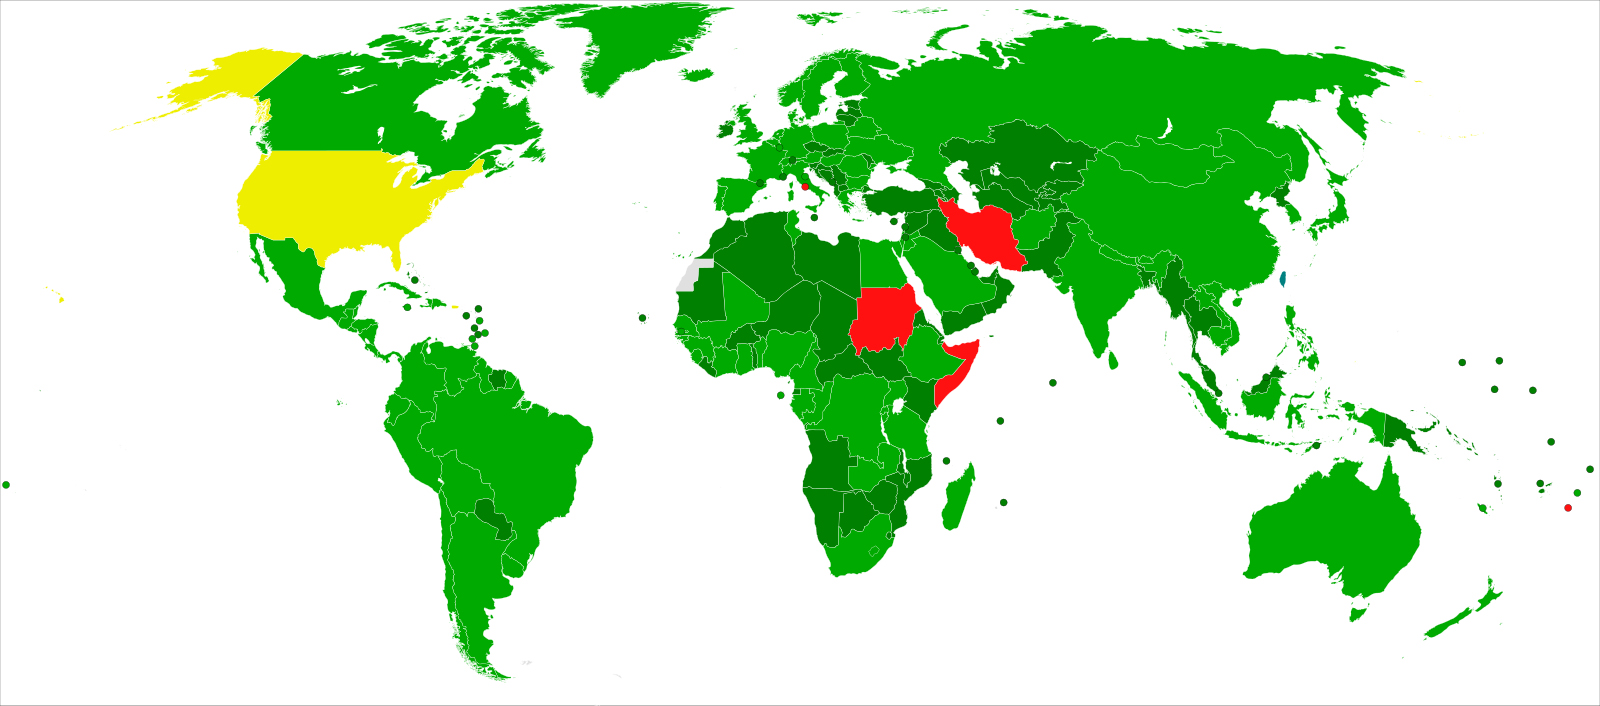 world map showing countries in green that have ratified CEDAW, yellow (the US) signed but not ratified, and other countries in red that have not signed.